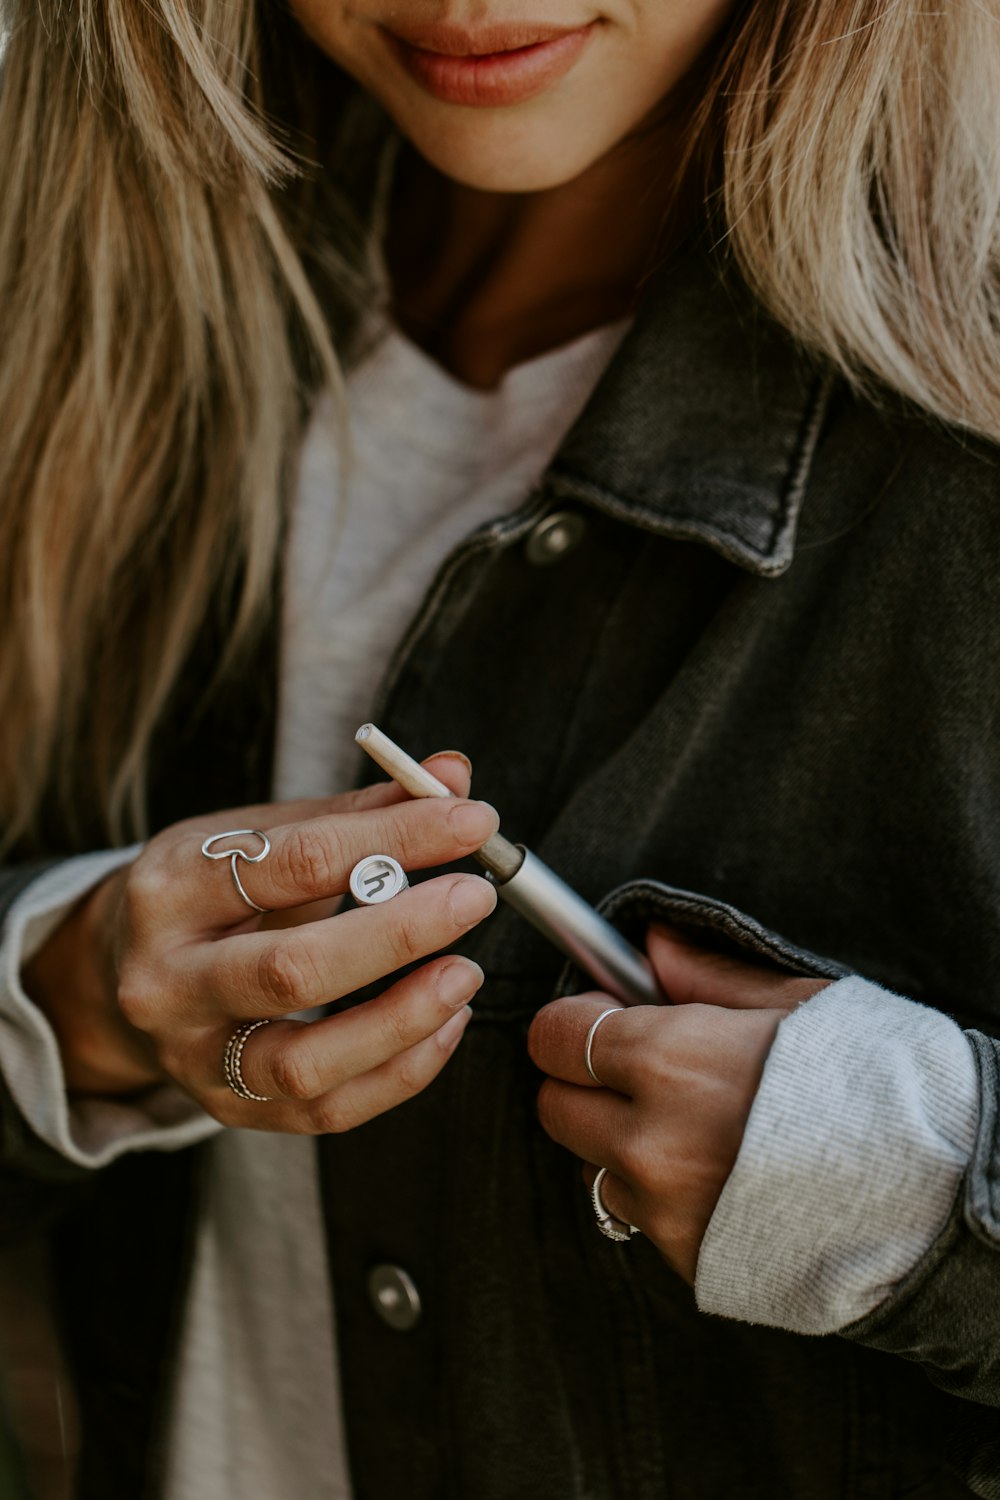 a woman is holding a cigarette and looking at her phone